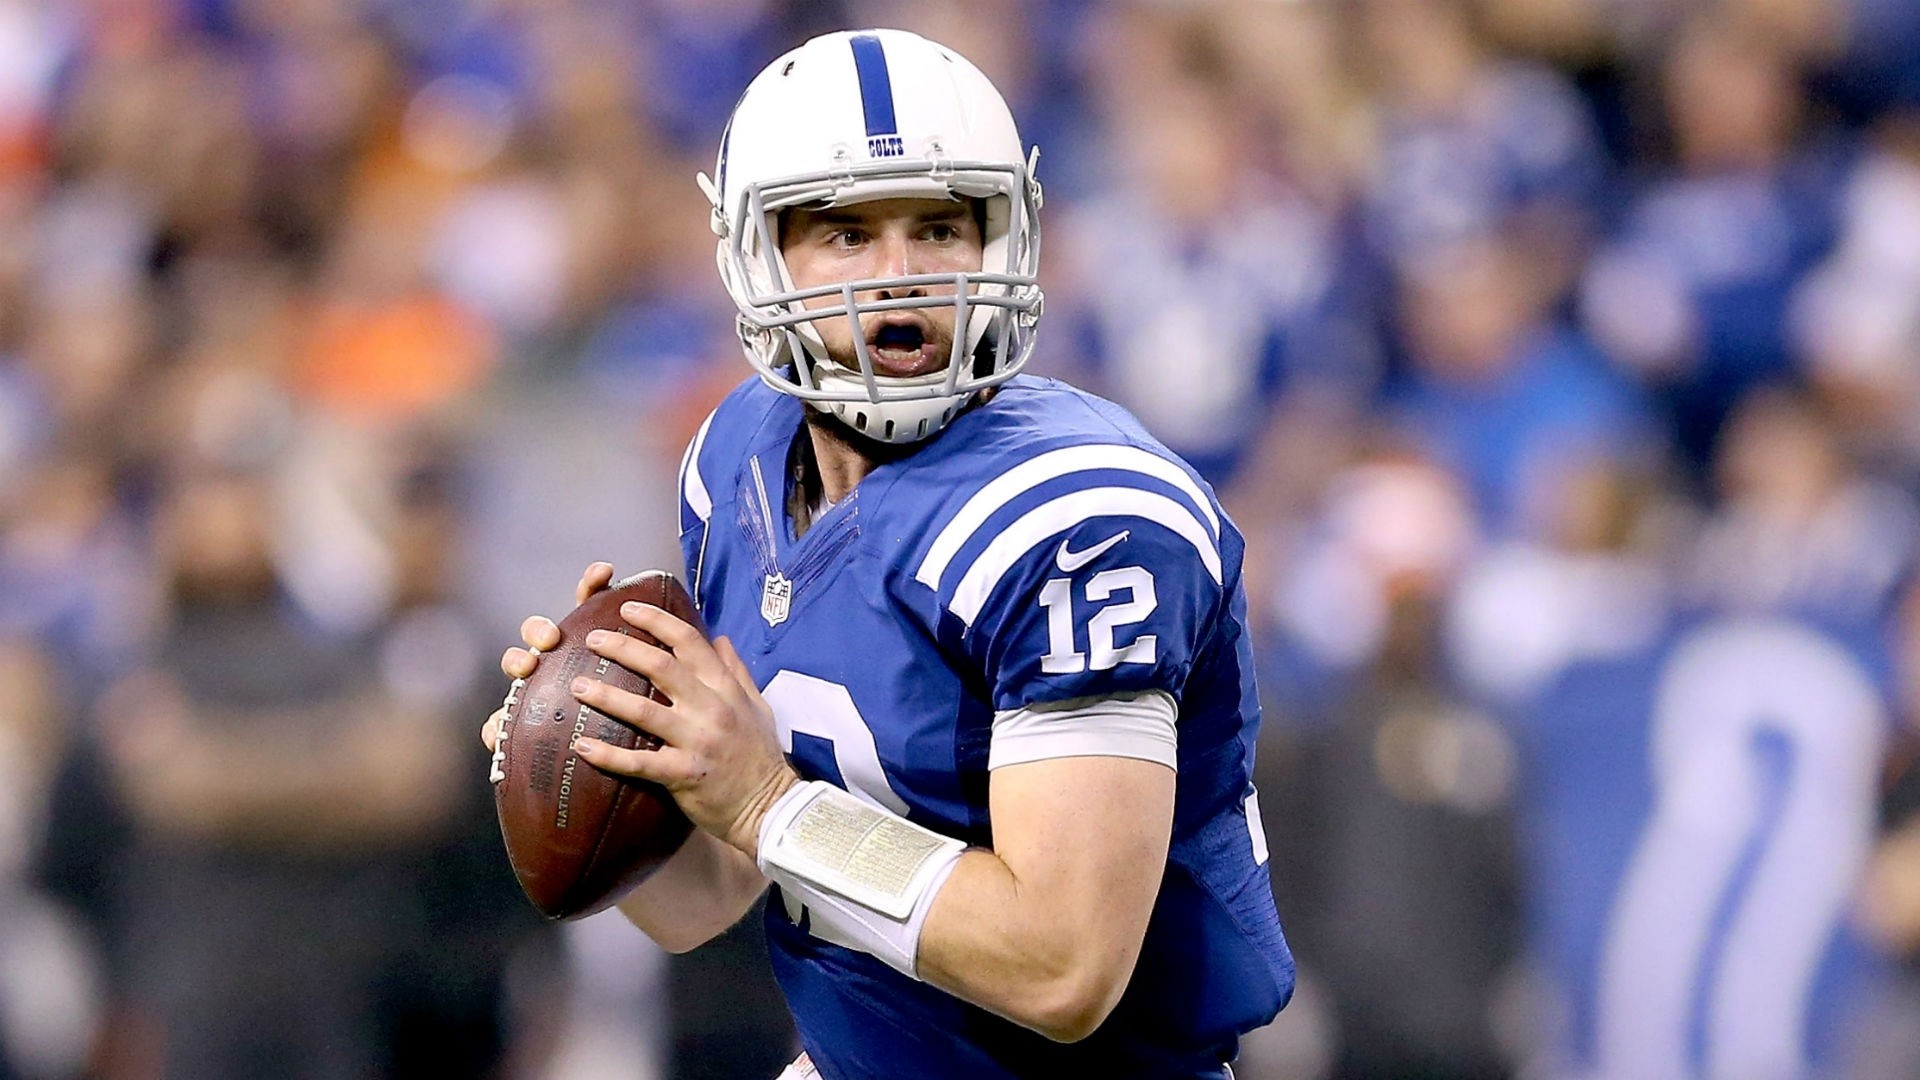 1920x1080  Wallpaper andrew luck, indianapolis colts, football